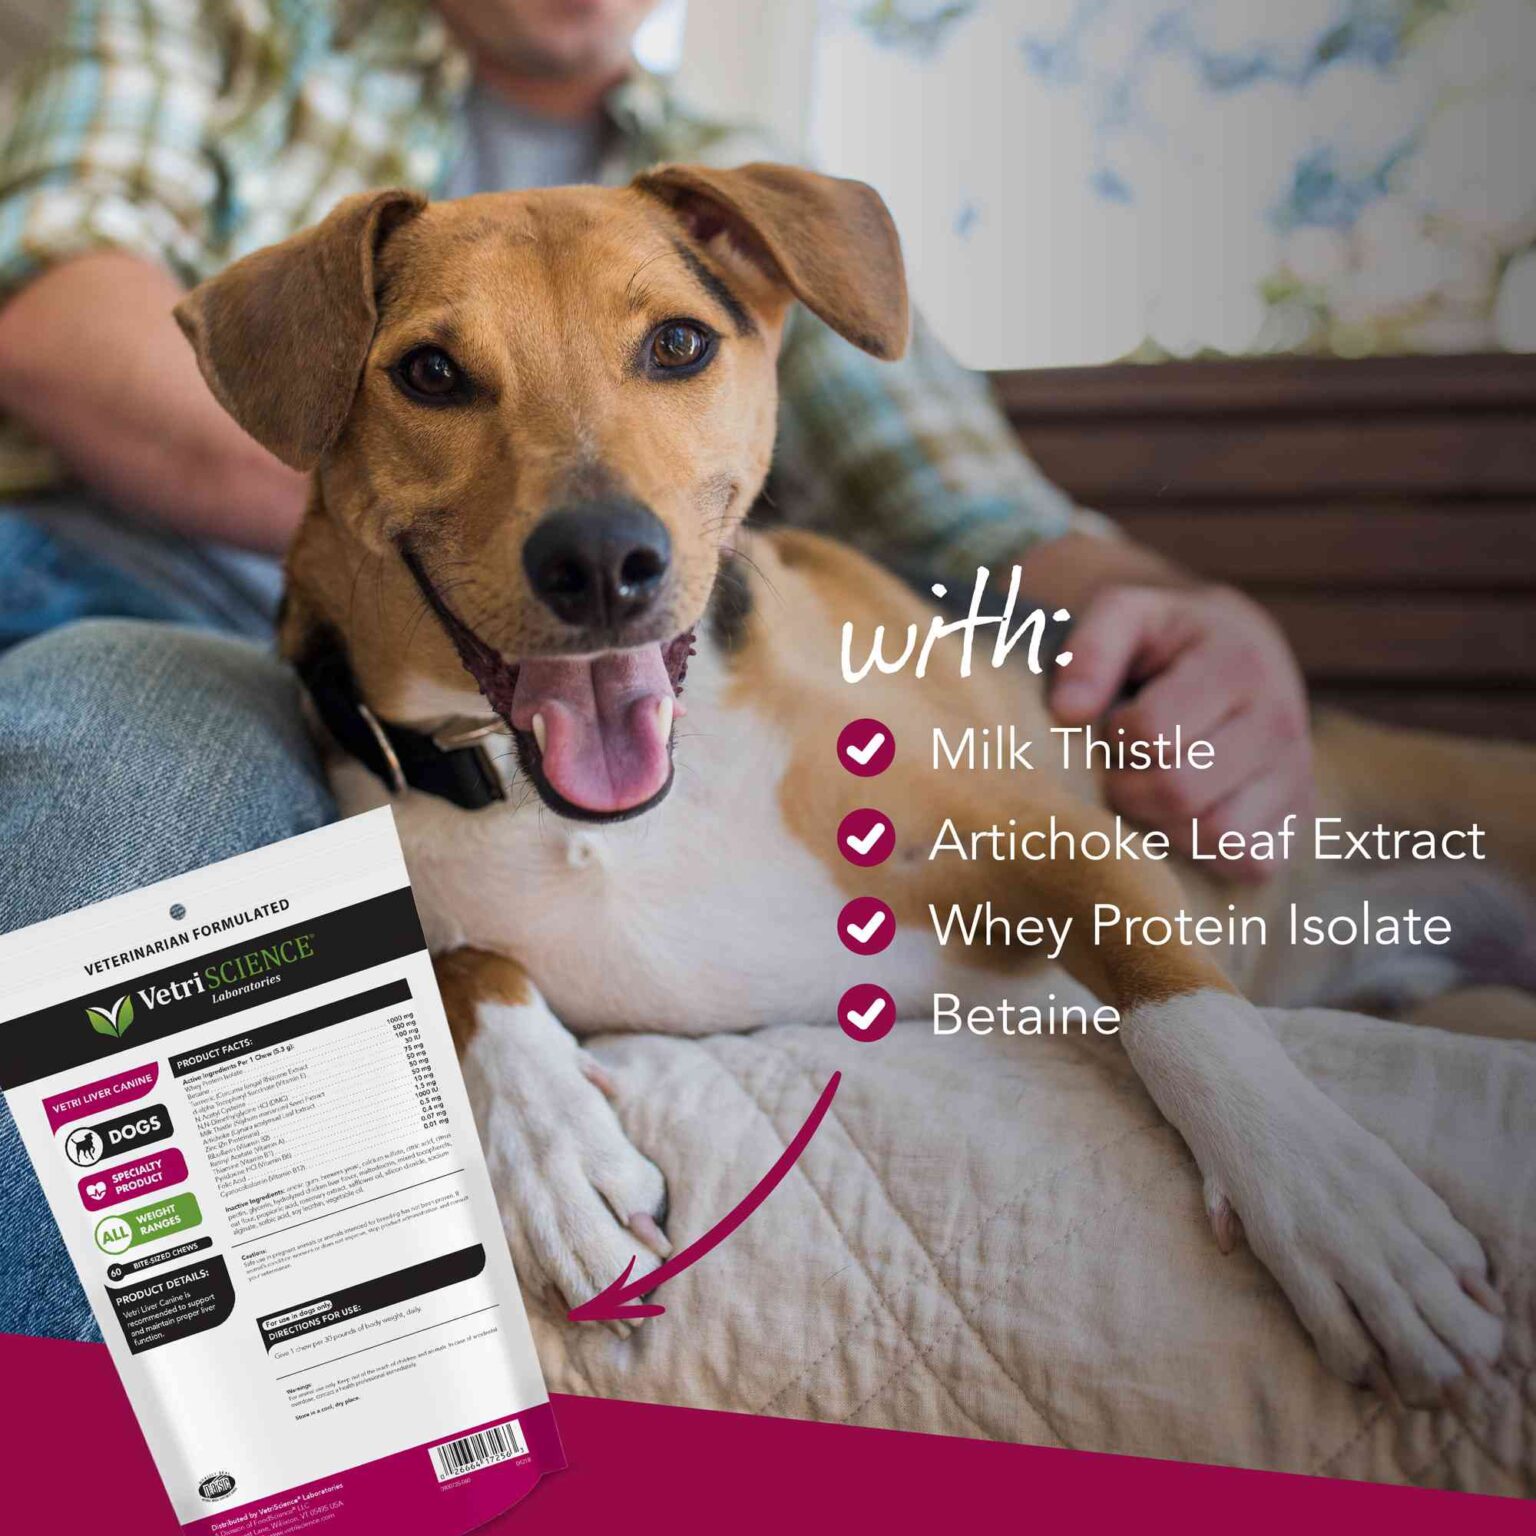 Liver Supplements for Dogs - Vetri Liver Canine Milk Thistle Supplement for Dogs - Ingredient Highlights